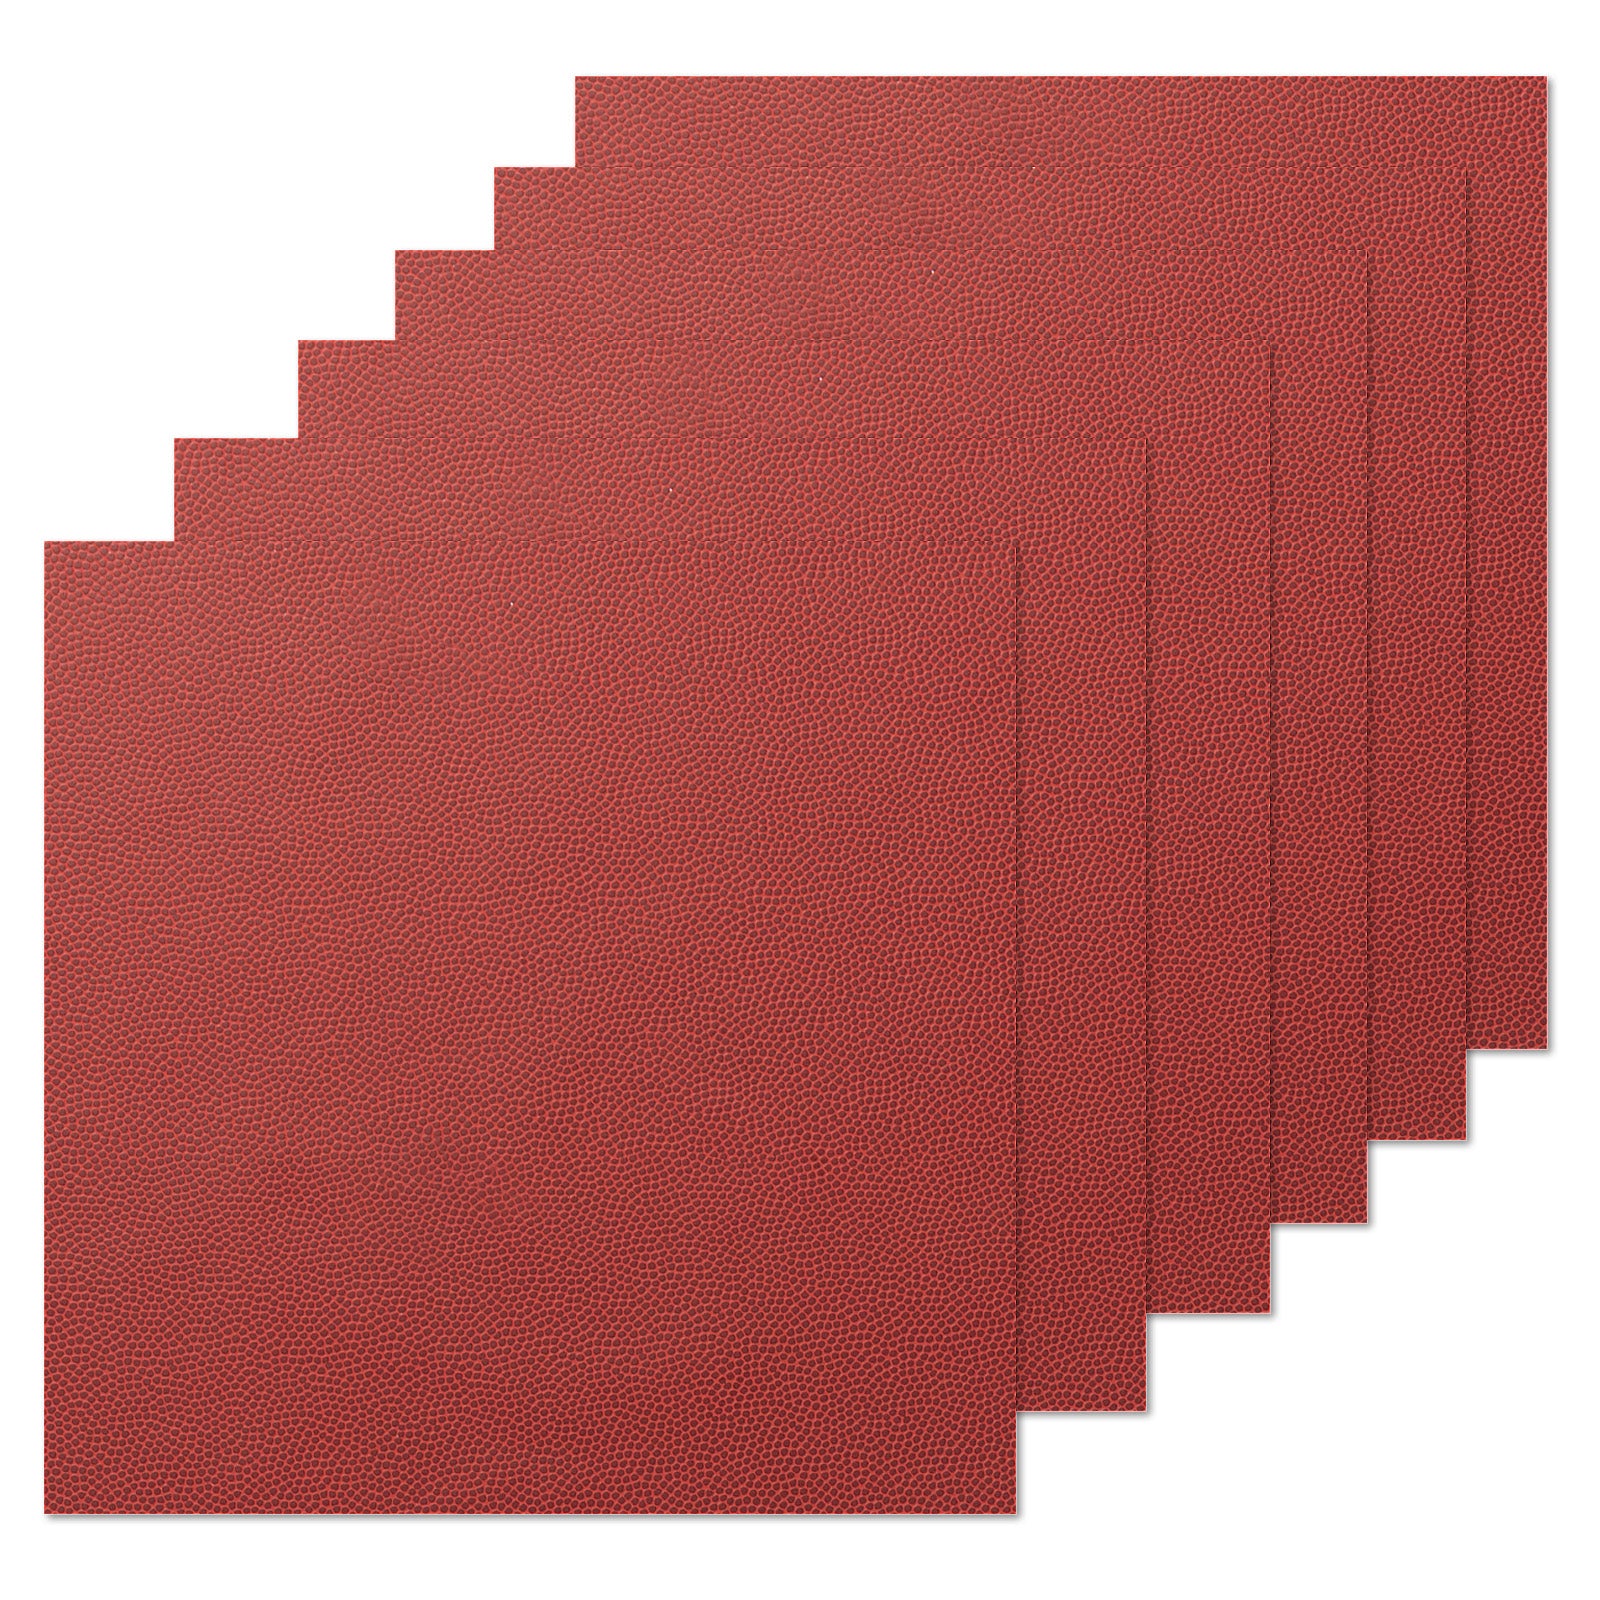 PYD Life Faux Leather Sheets 12 x 12 Leather Patches for Laser Engraving, Punching, Foil Transfer (4 Color Options) 12 x 12 / Red / Faux Leather